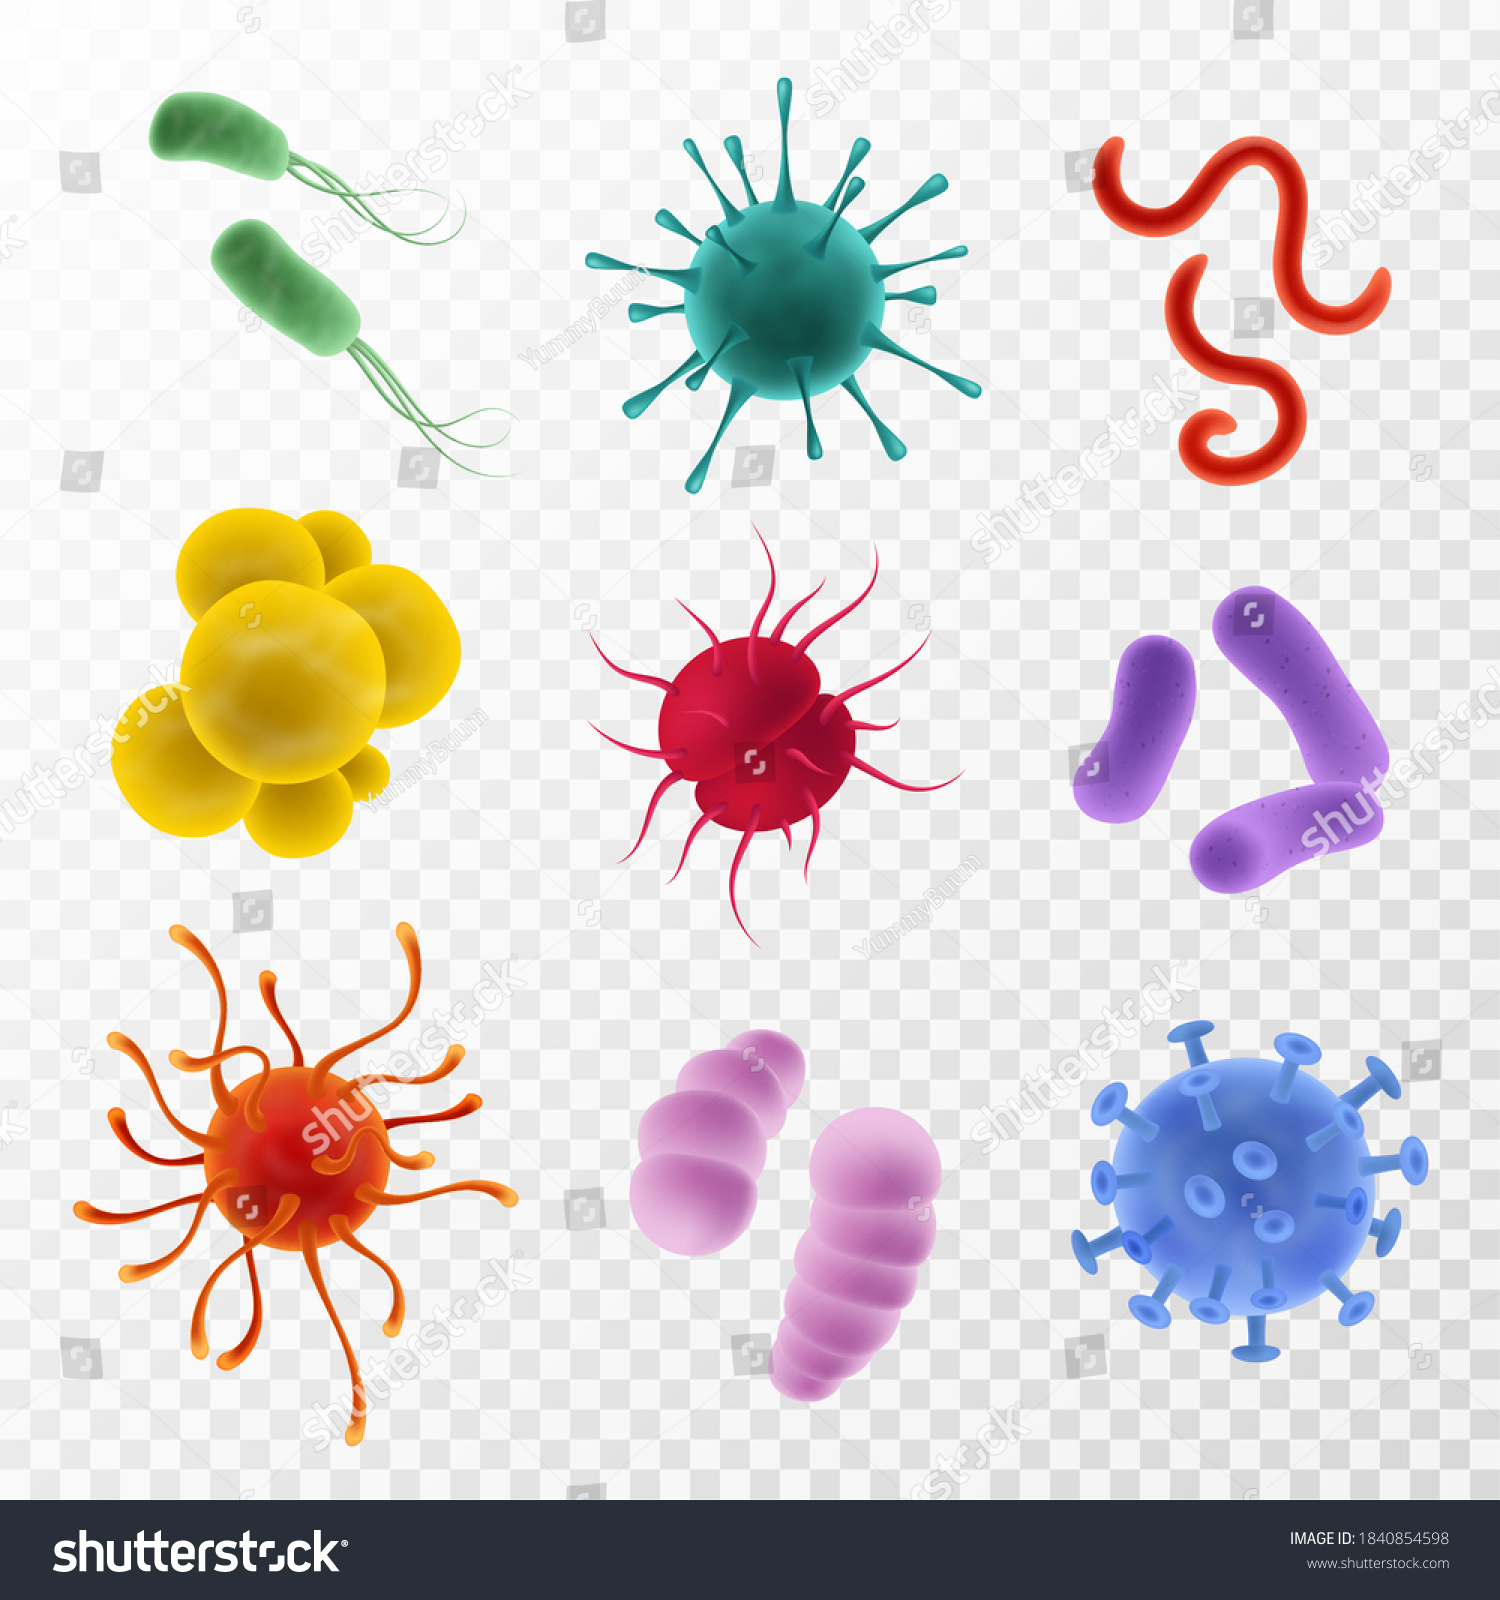 Realistic viruses. Types and microorganism colorful shapes. Bacteria, germs and bacillus flu and covid-19. Biological science laboratory, microbiology objects 3d vector on transparent background set #1840854598